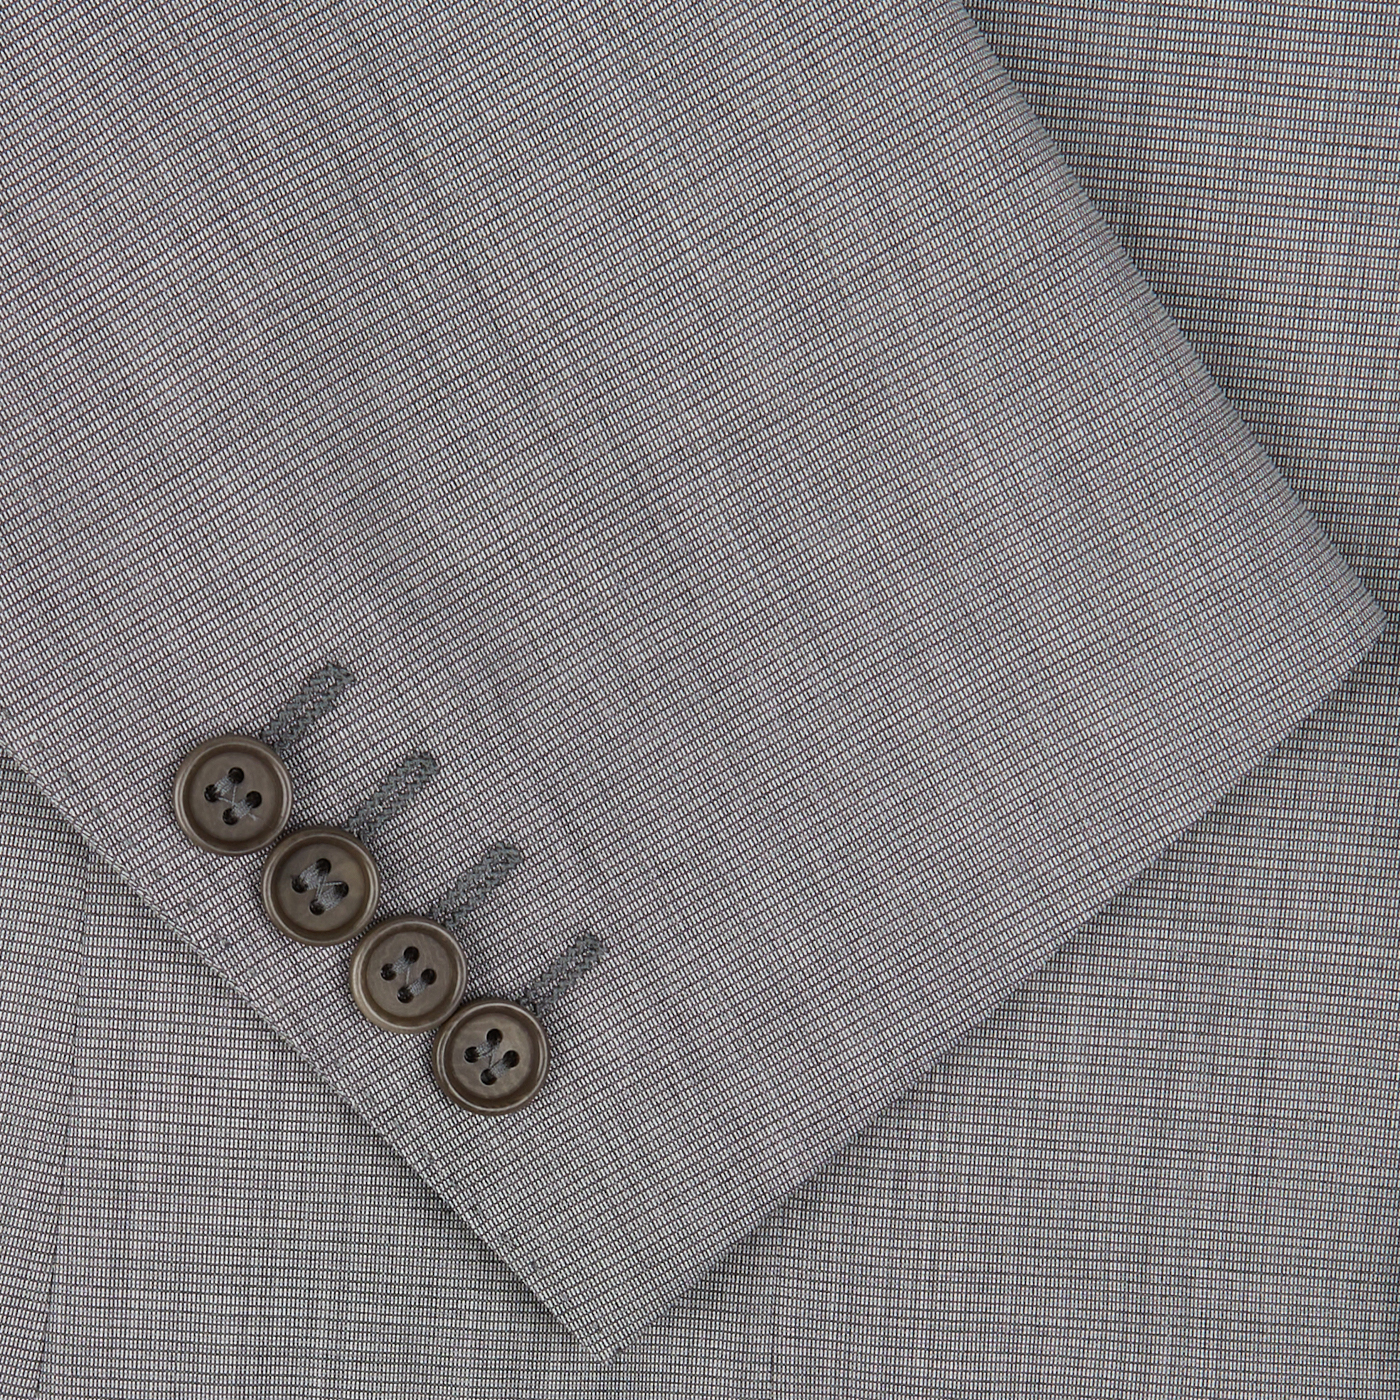 Four brown buttons on the sleeve of a Canali Light Grey Micro Check Wool Suit embody classic sartorial elegance.